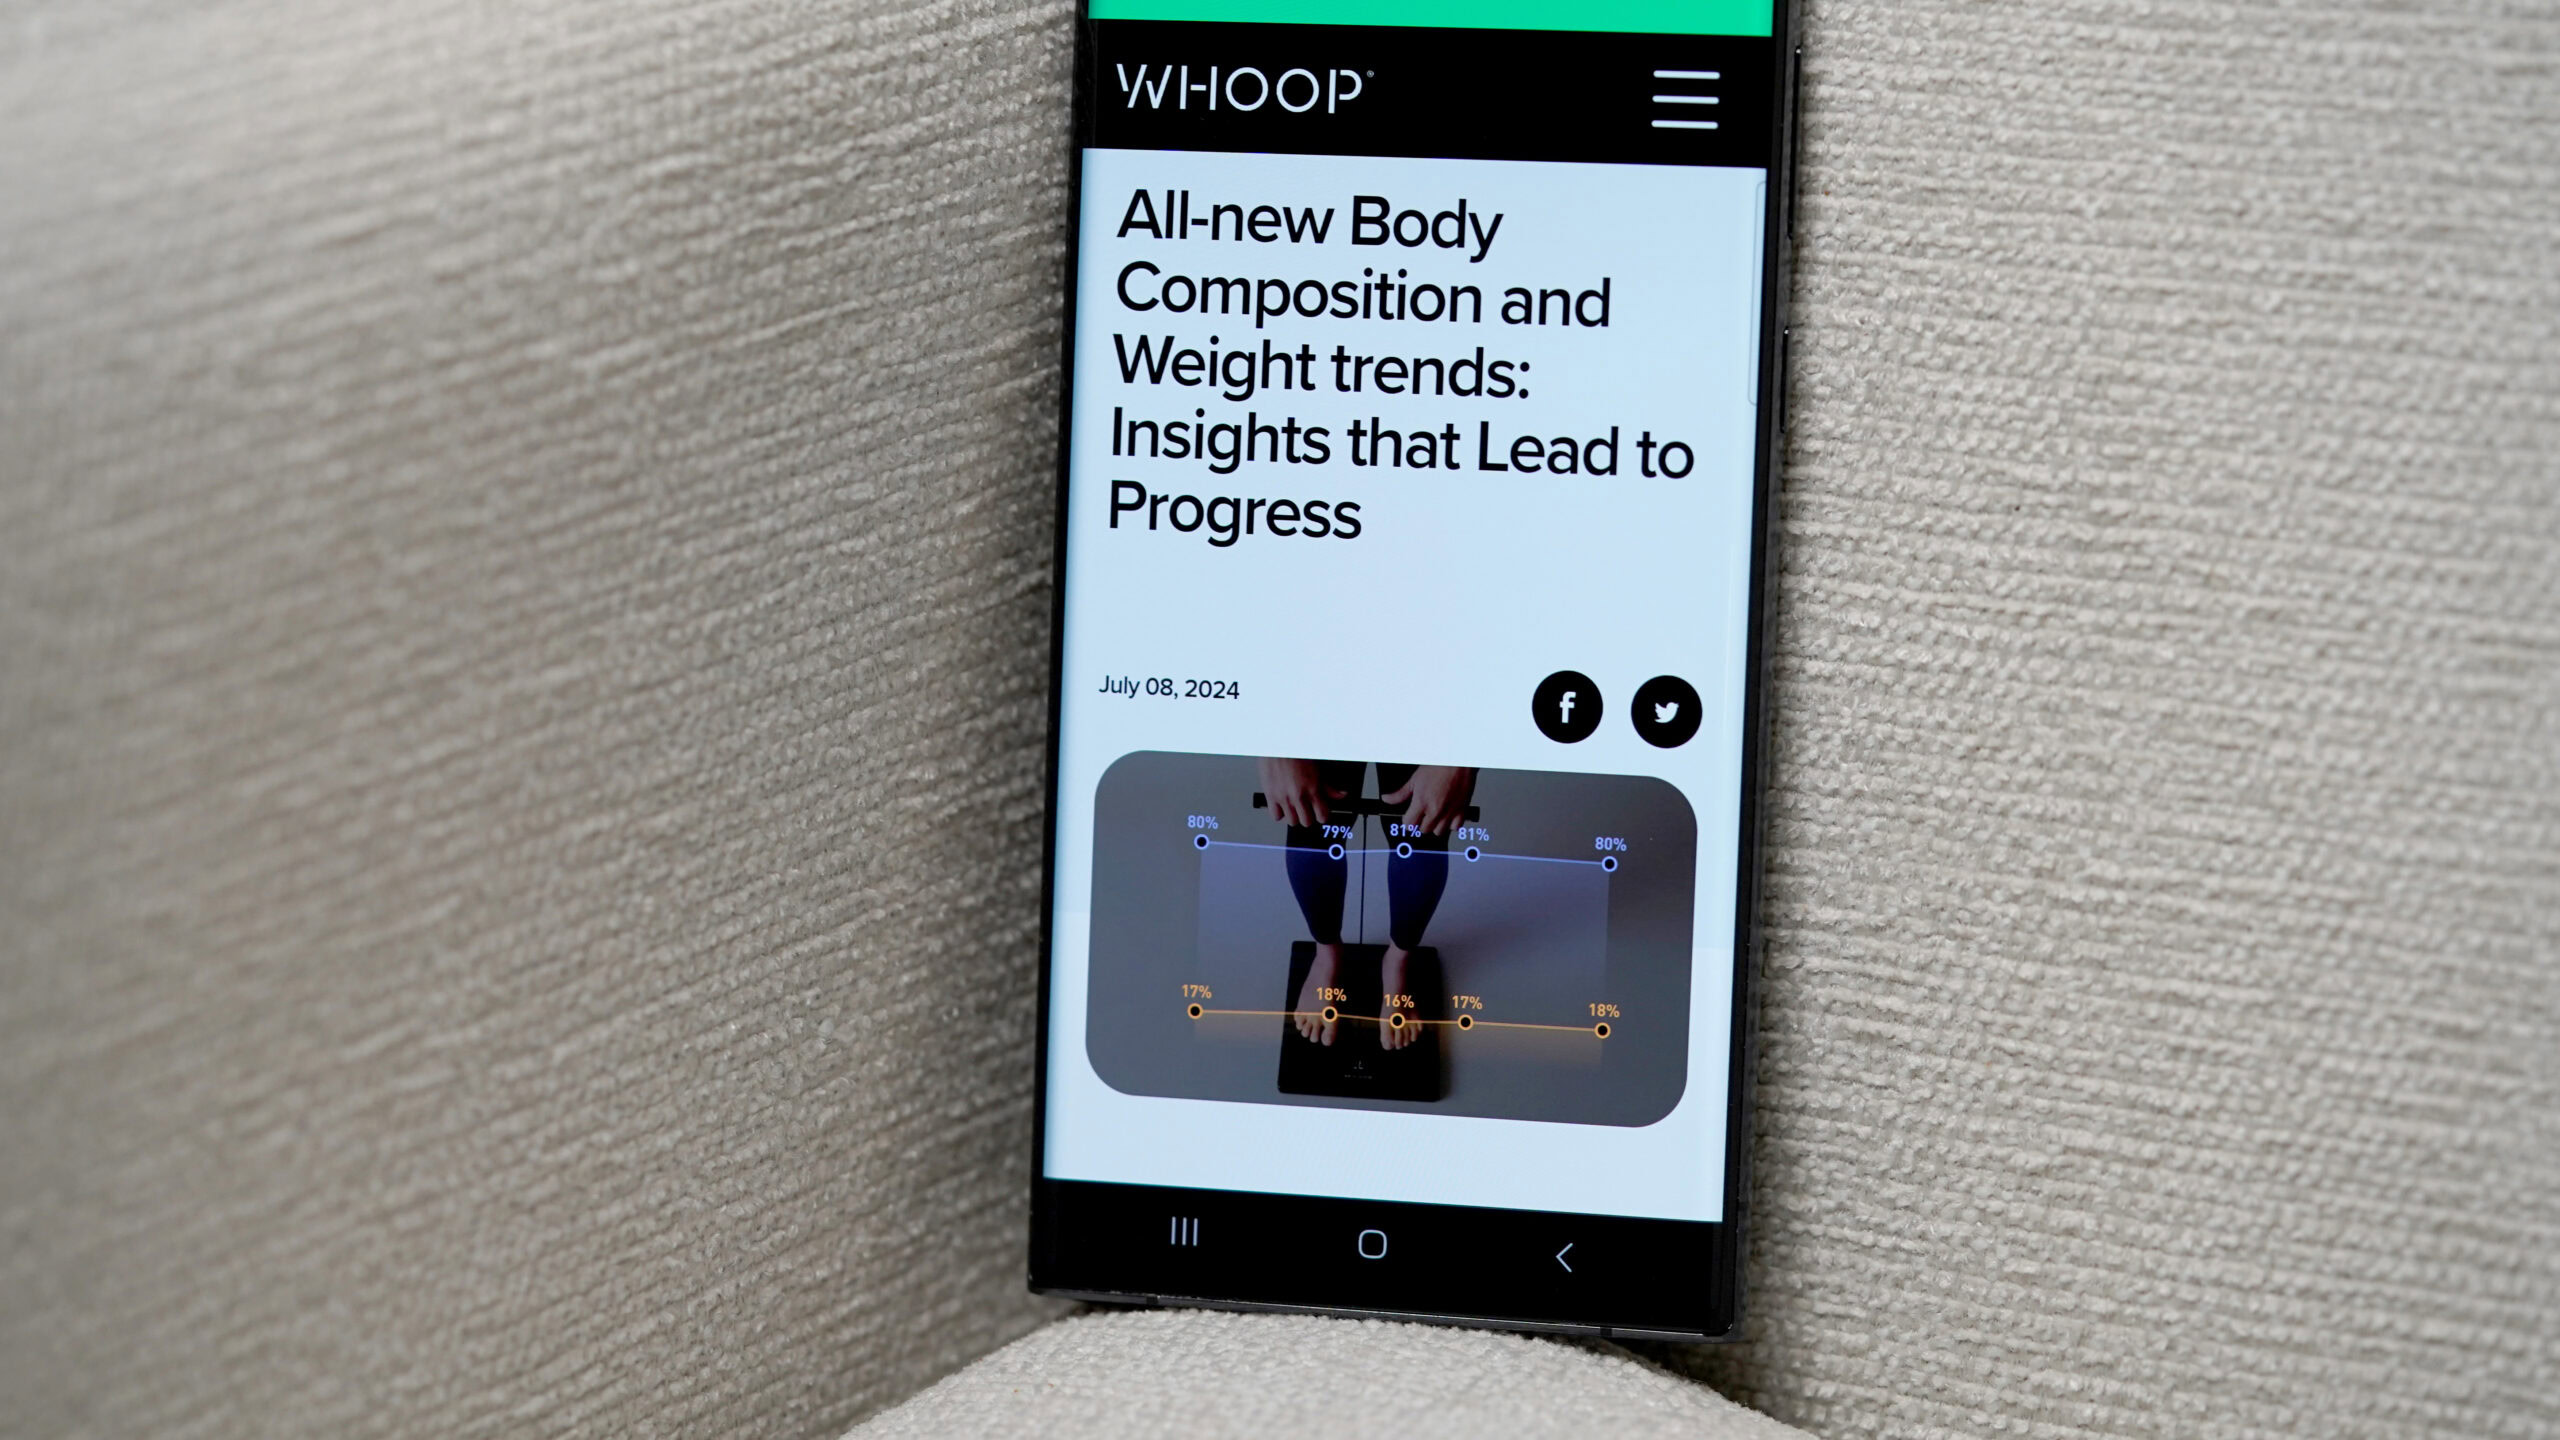 A Samsung phone displays information about Whoop's new Body Composition tracking.